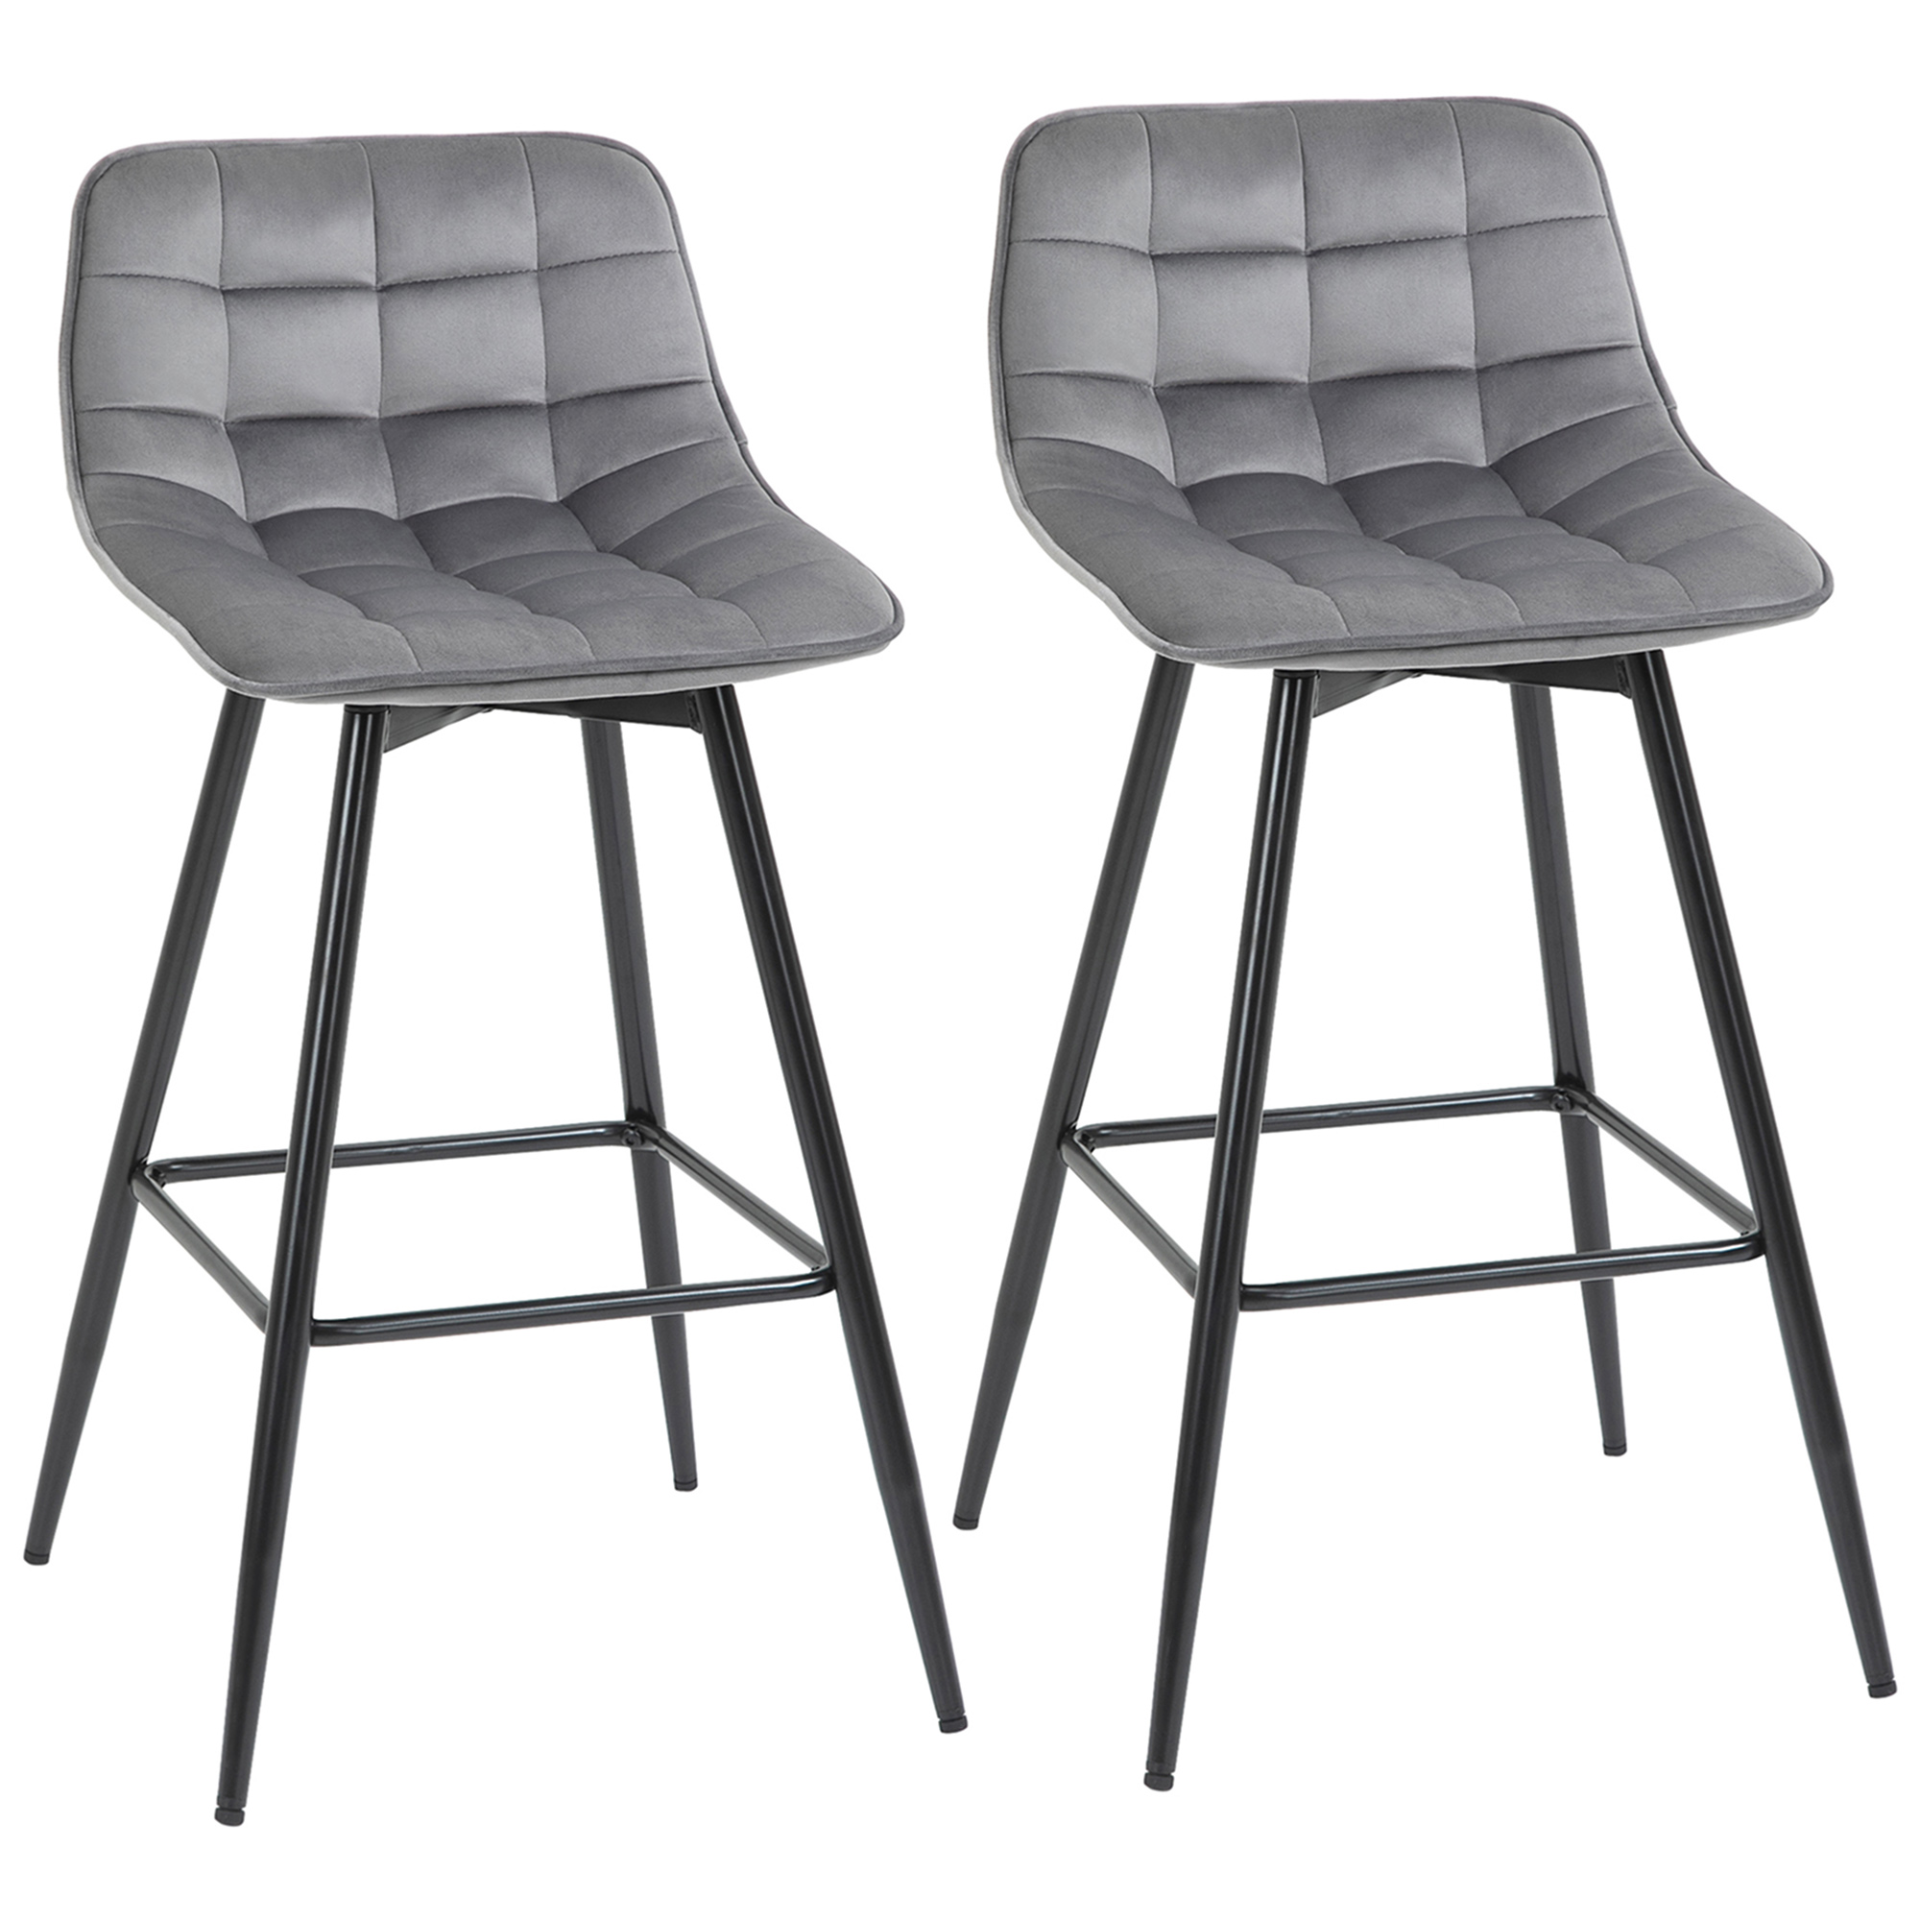 HOMCOM Set of 2 Bar Stools Velvet-Touch Dining Chairs Kitchen Counter Chairs    Fabric Upholstered seat with Metal Legs, Backrest, Grey